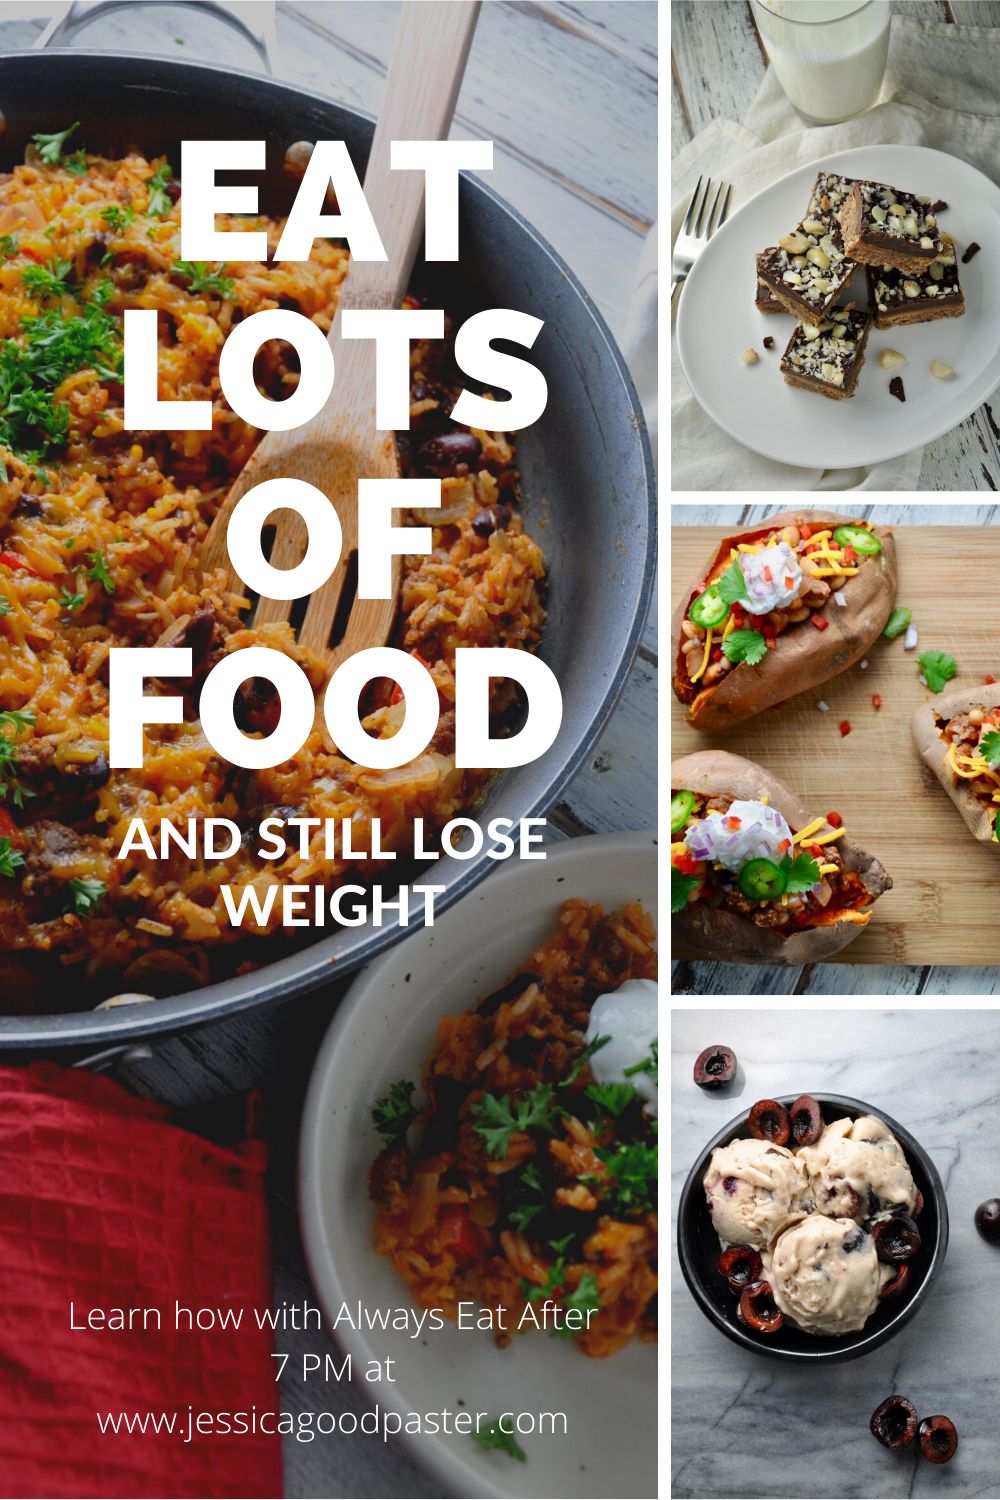 Eat Big Meals and Desserts and Still Lose Weight! | I lost six pounds in two weeks the healthy way with the new book Always Eat After 7 PM! Learn how you can have big meals, eat when you're most hungry, and even have dessert every night with this program from fitness expert Joel Marion. #loseweight #healthy #desserts #getfit #weightloss #diet #IF